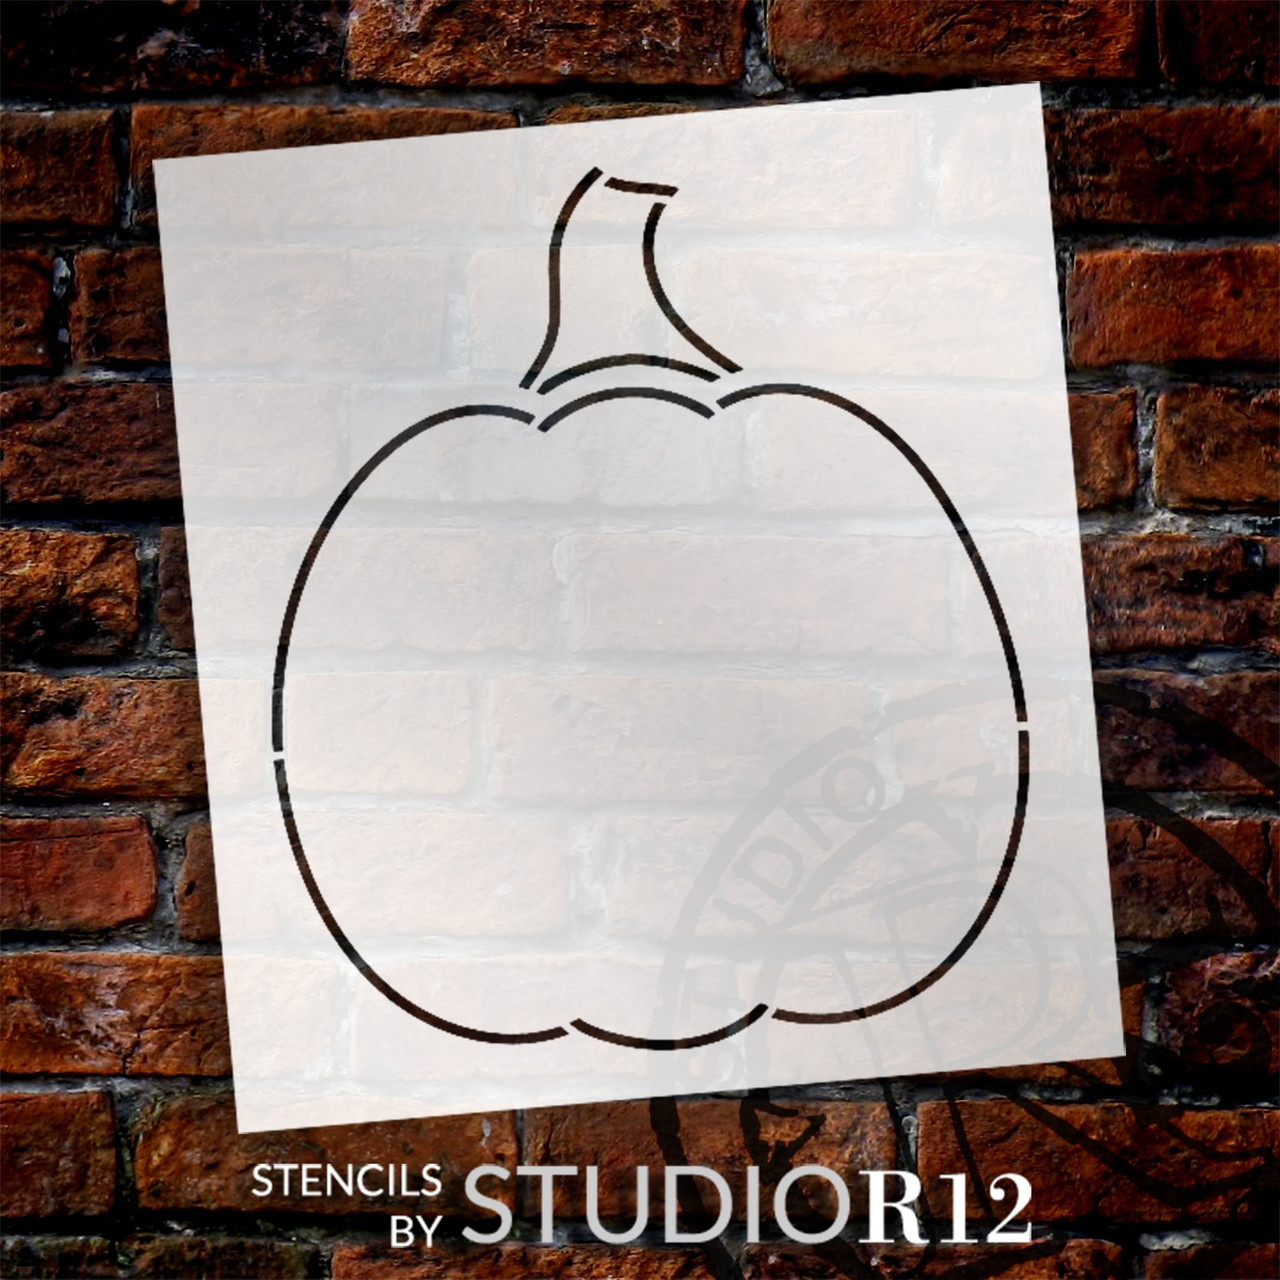 Round Pumpkin Silhouette Outline Stencil by StudioR12 - Select Size - USA Made - Craft DIY Fall Living Room Decor | Paint Door Hanger Wood Sign Pillow